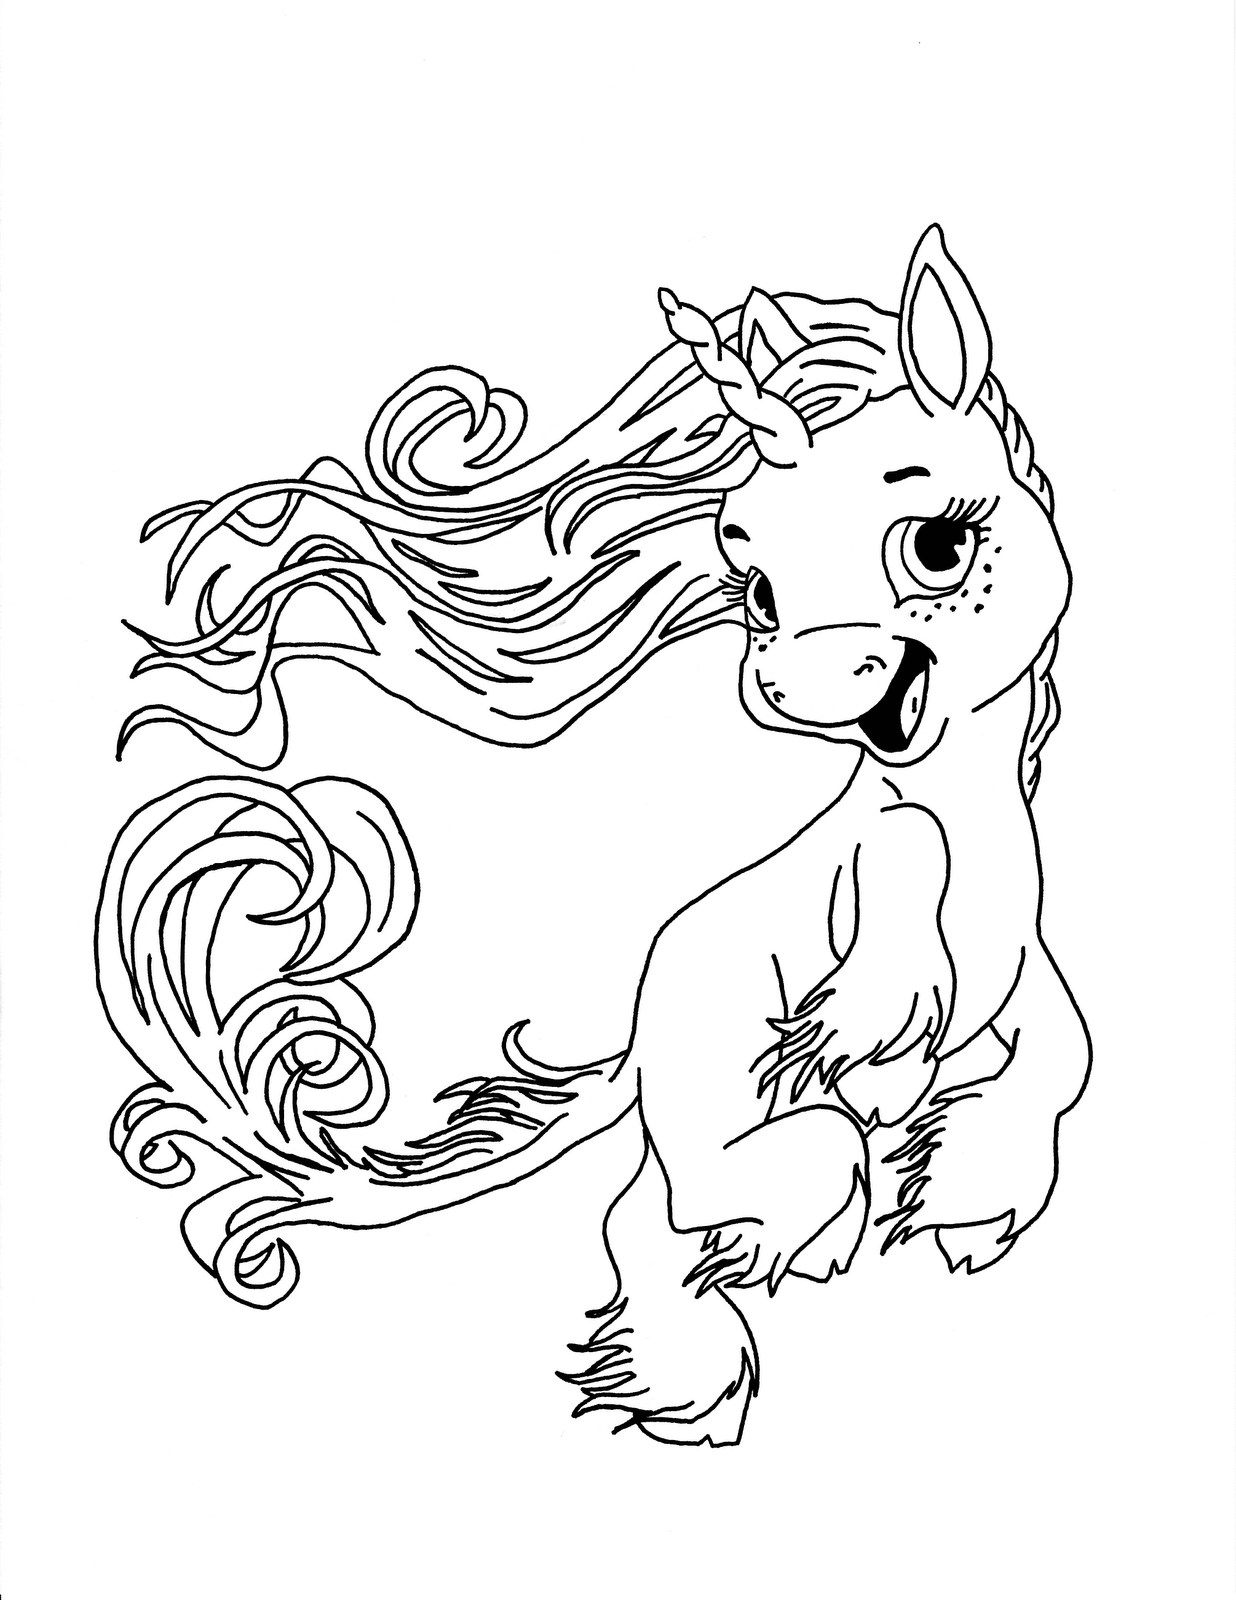 Unicorn Coloring Pages   Free Printable Coloring Pages For Kids ...